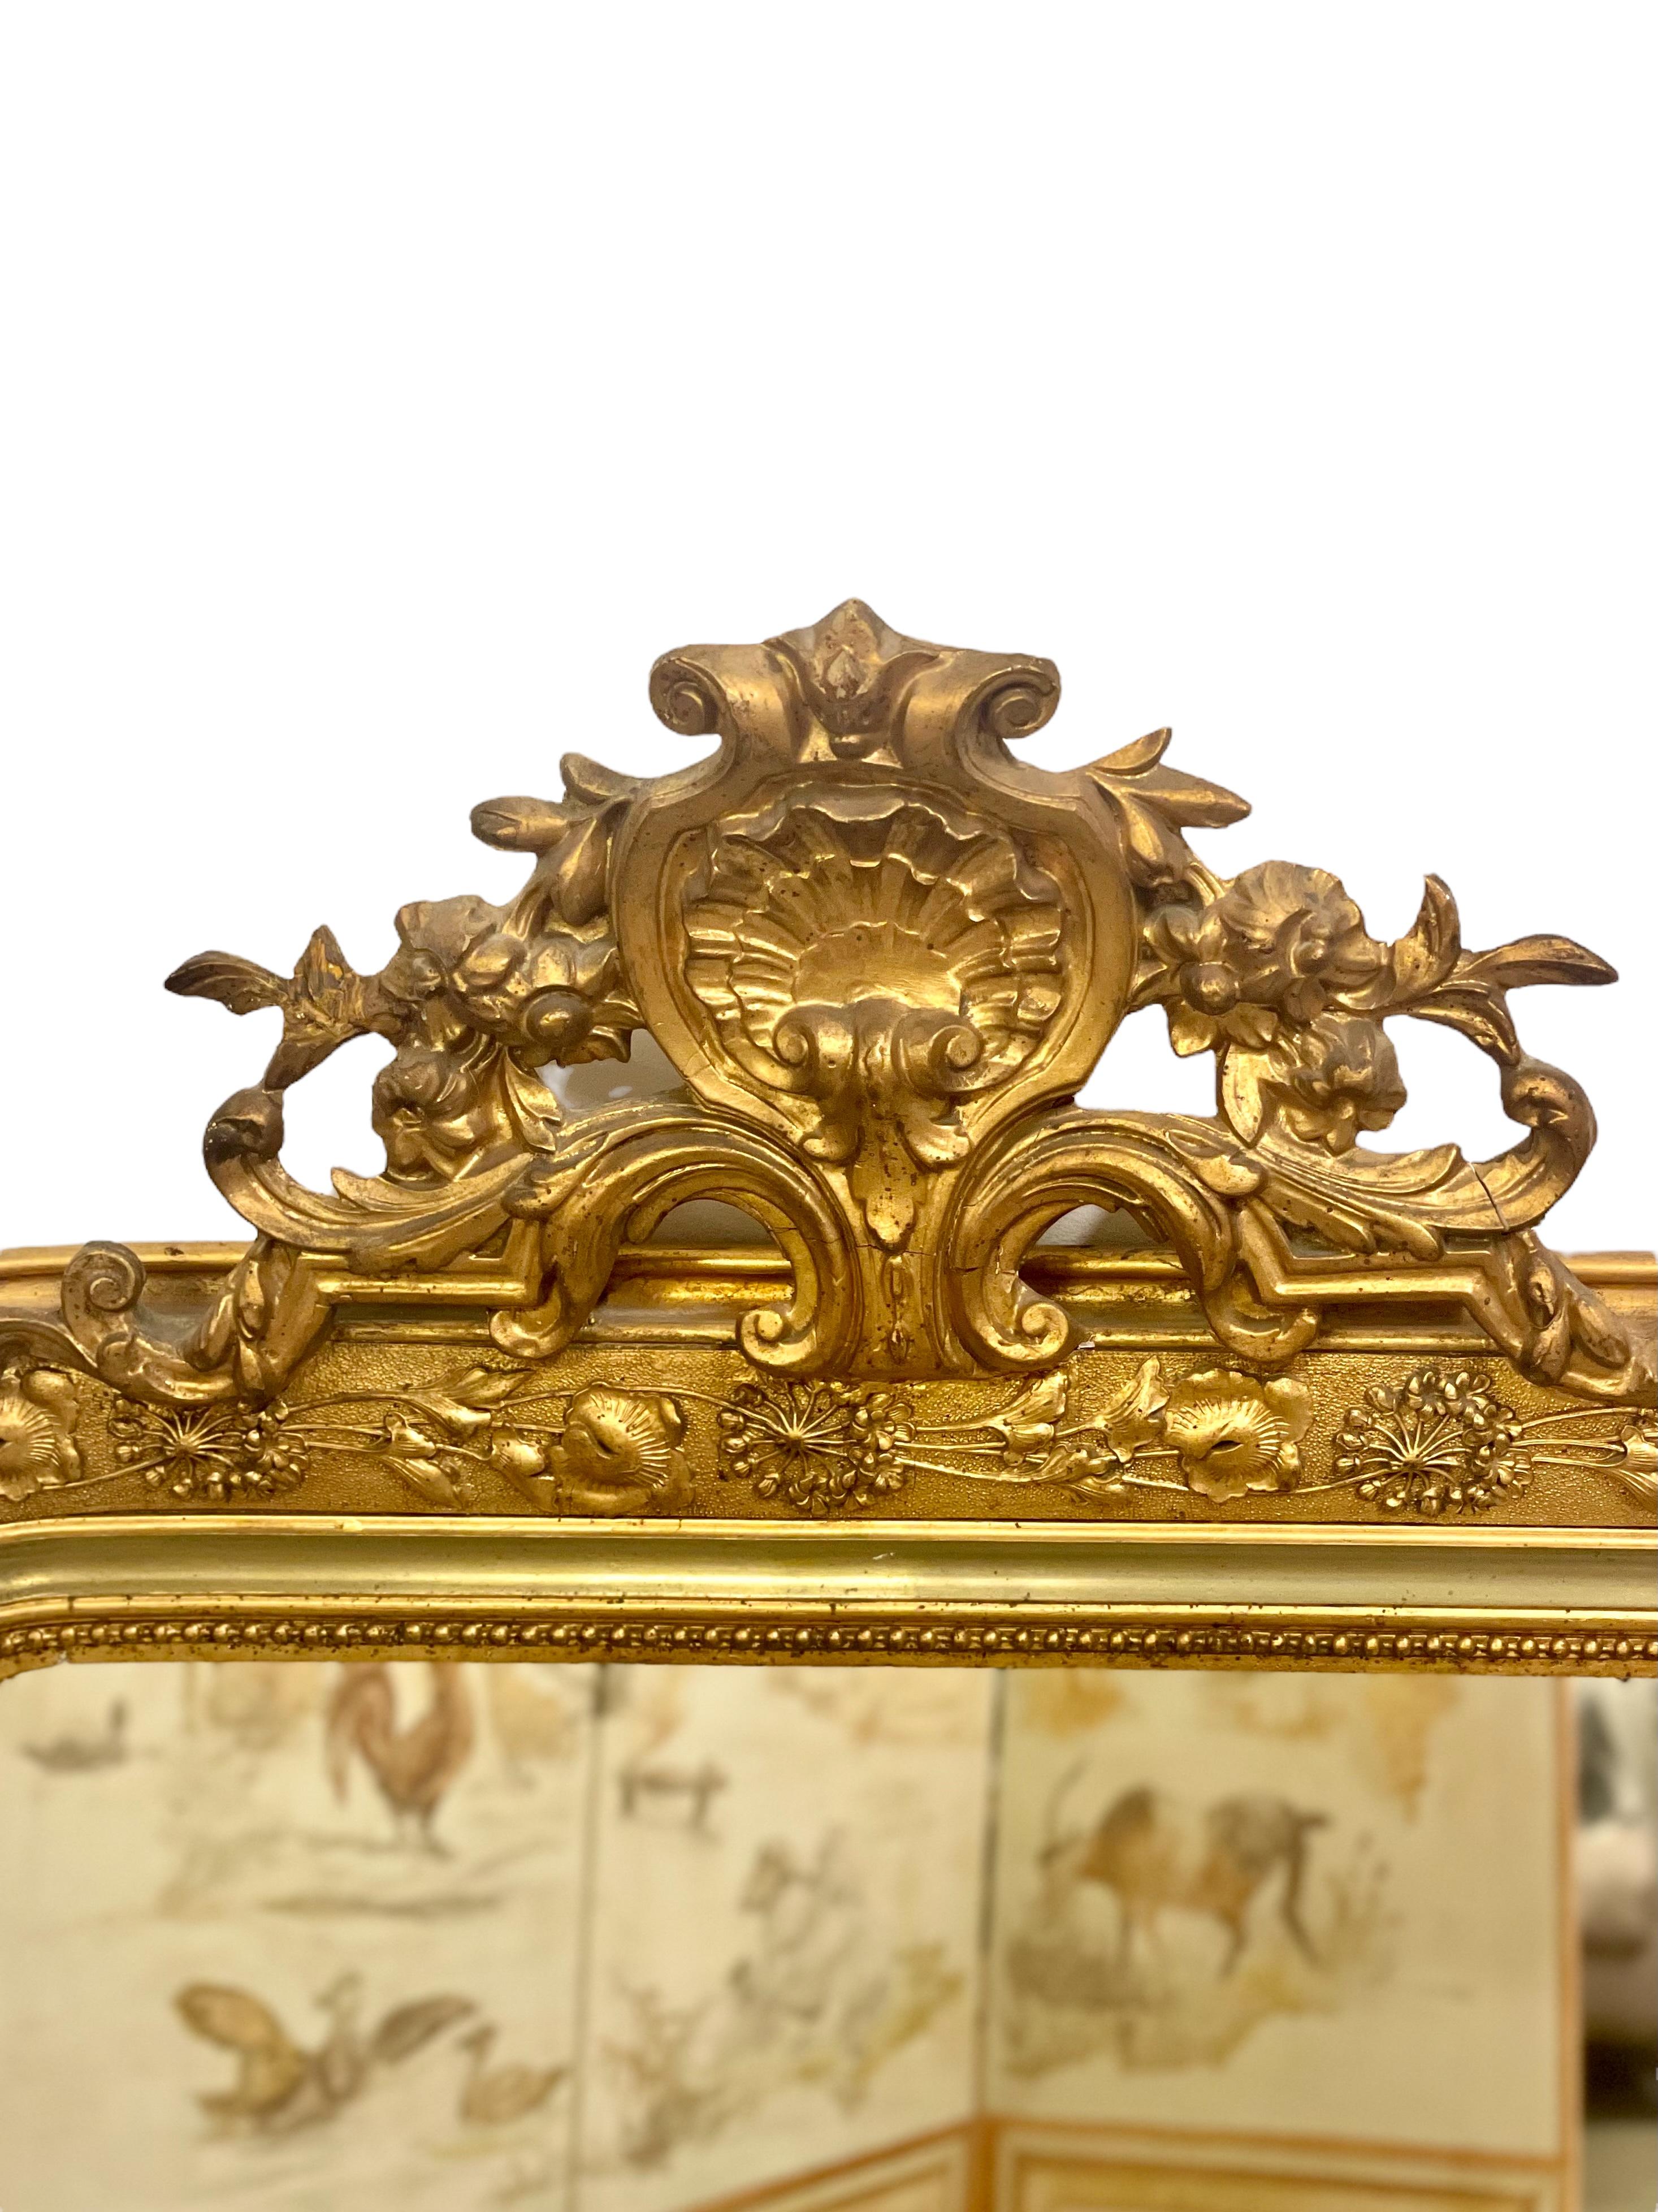 A very ornate late 19th century rectangular mirror, with rounded upper corners in the Louis Philippe style. An openwork crest of acanthus leaves rises above the frame, which itself is beautifully decorated with a repeating design of intricately